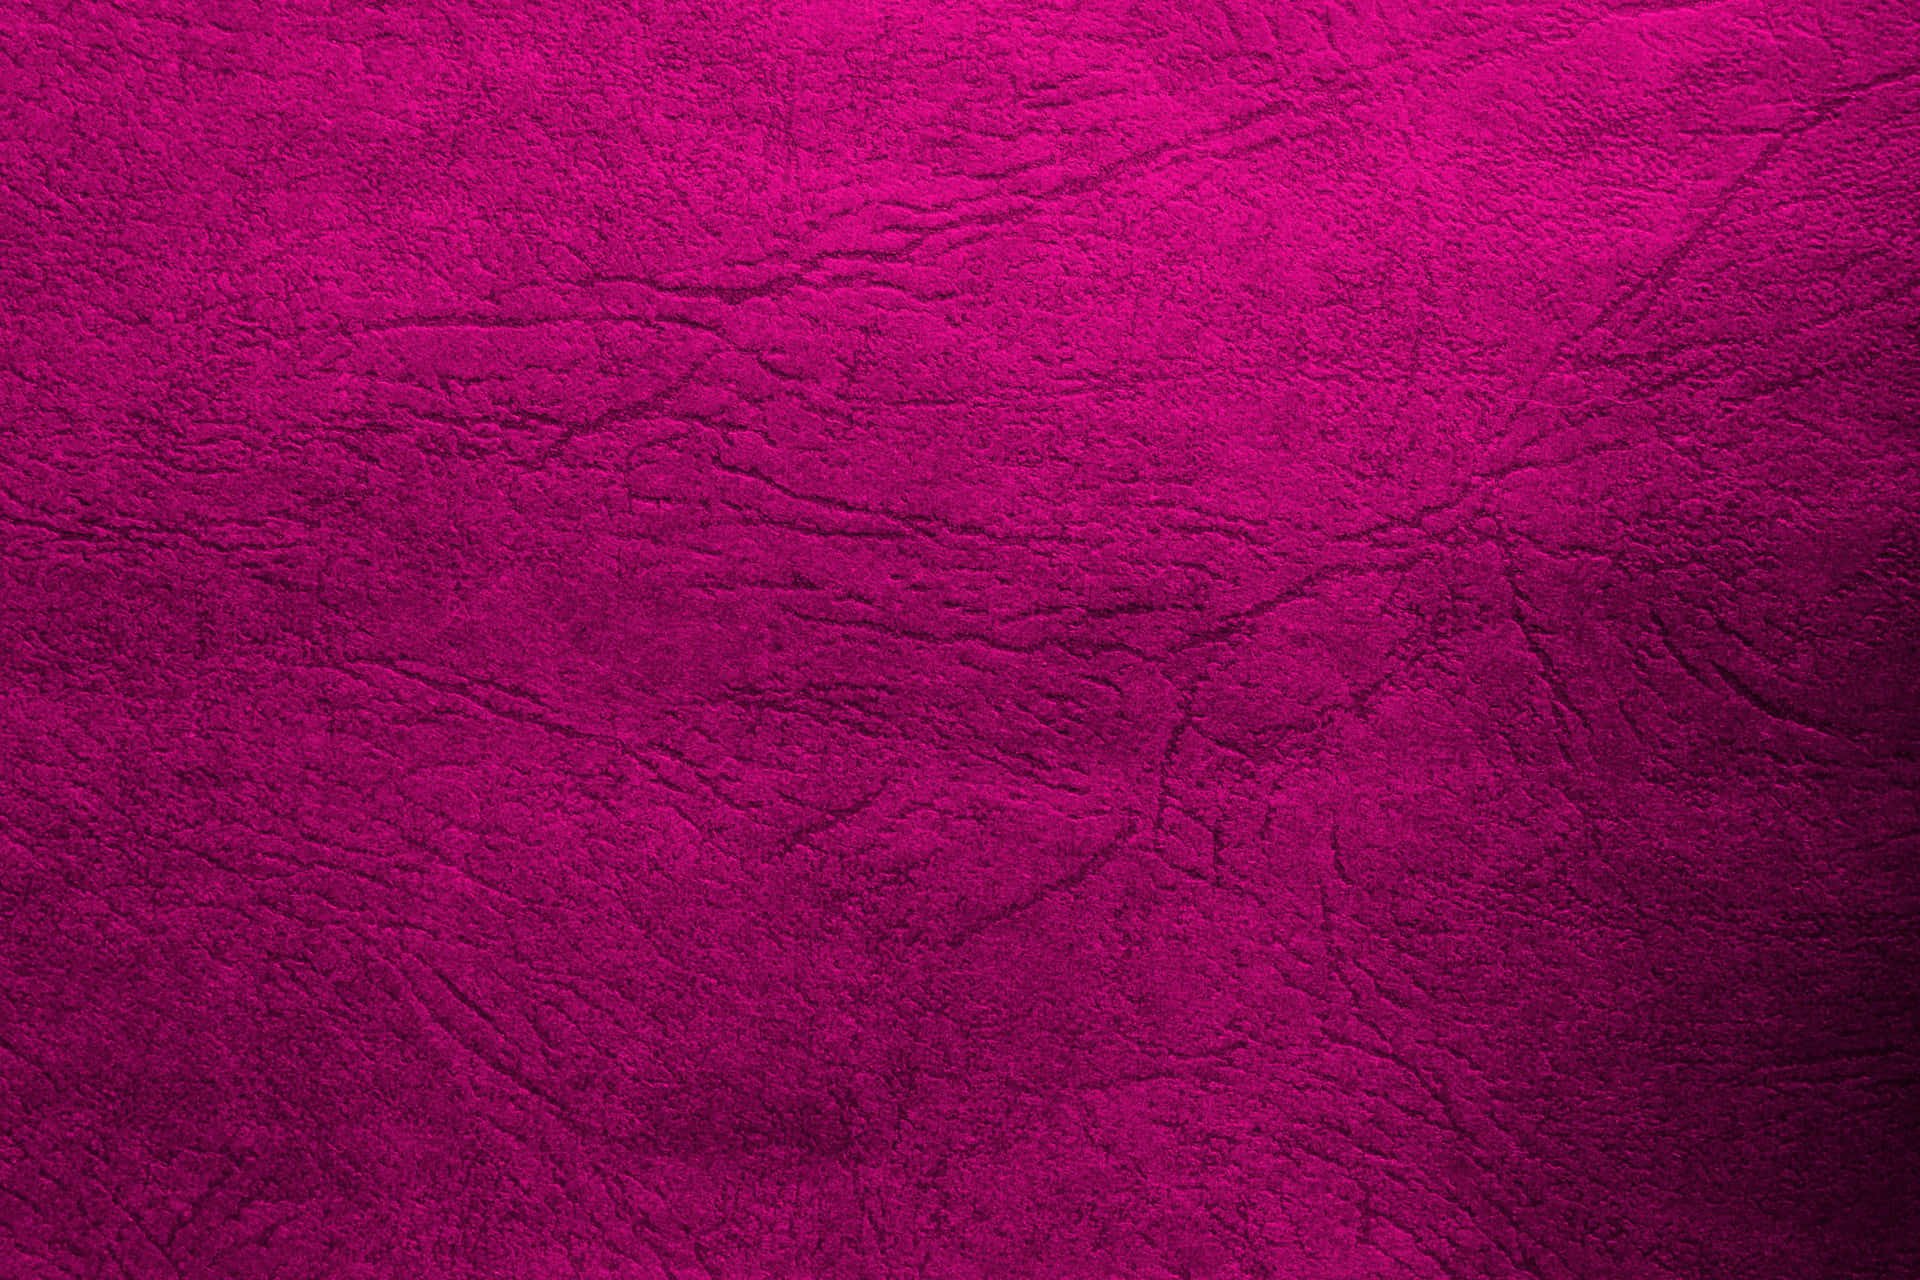 Dark Pink Background Images HD Pictures and Wallpaper For Free Download   Pngtree